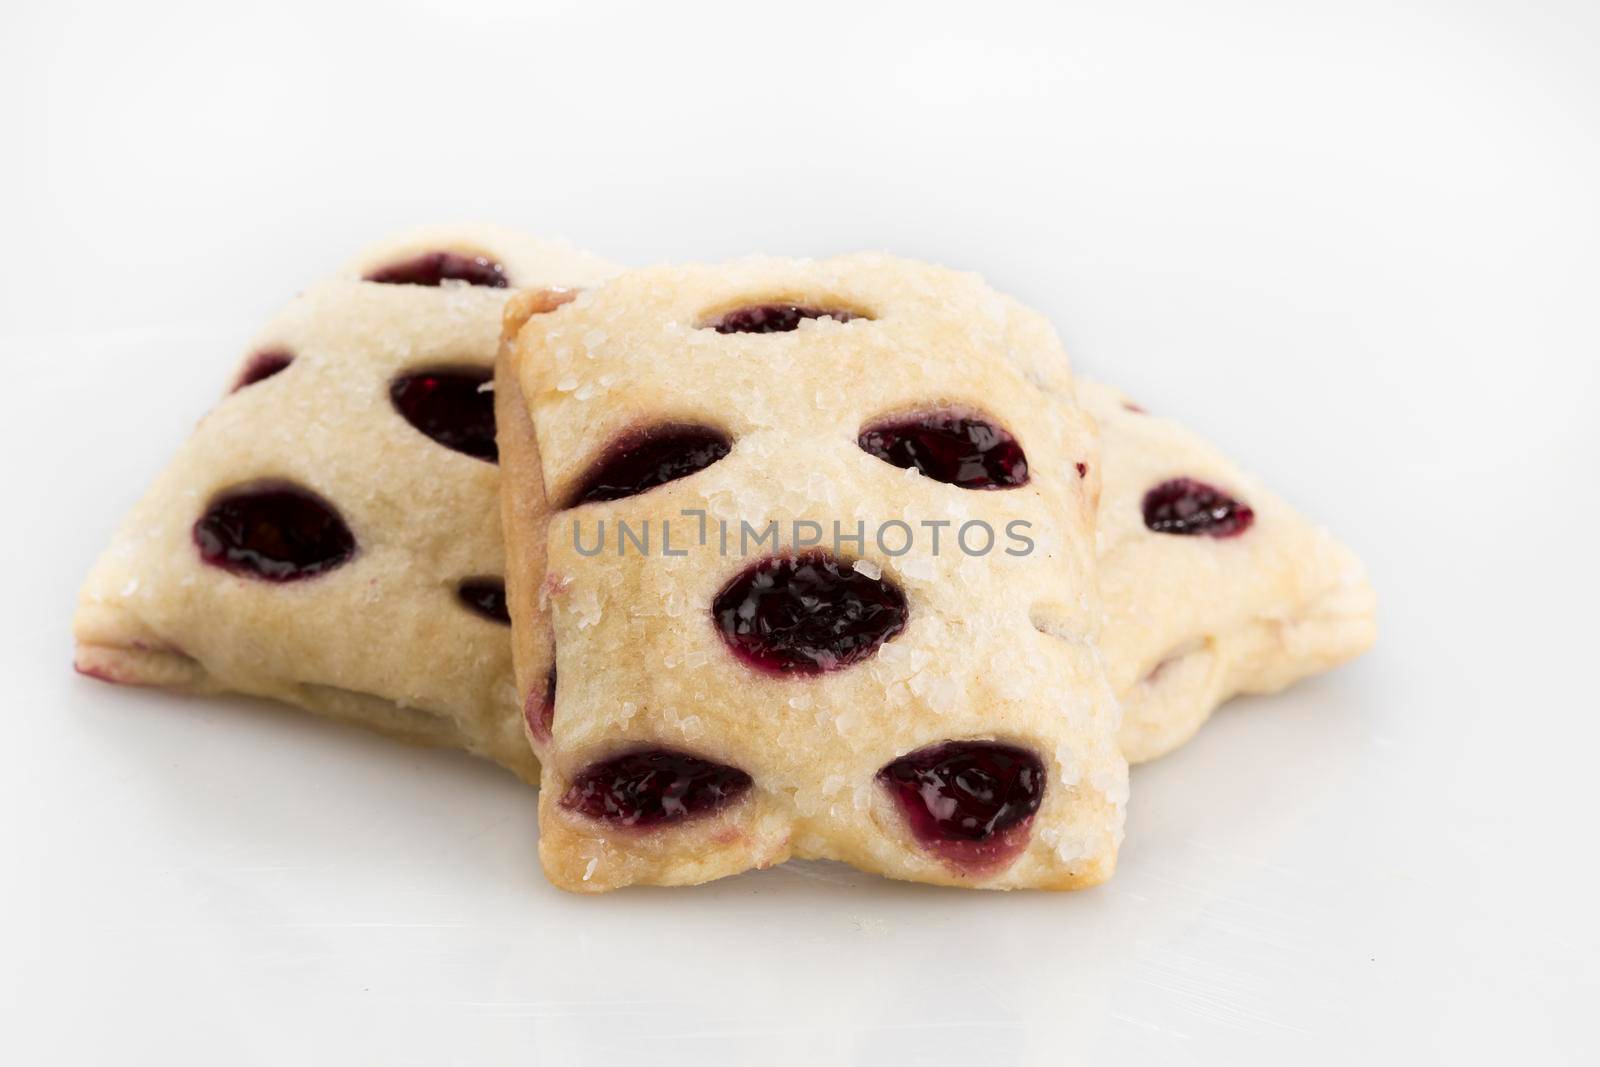 Three berry filled mini strudels on a white background